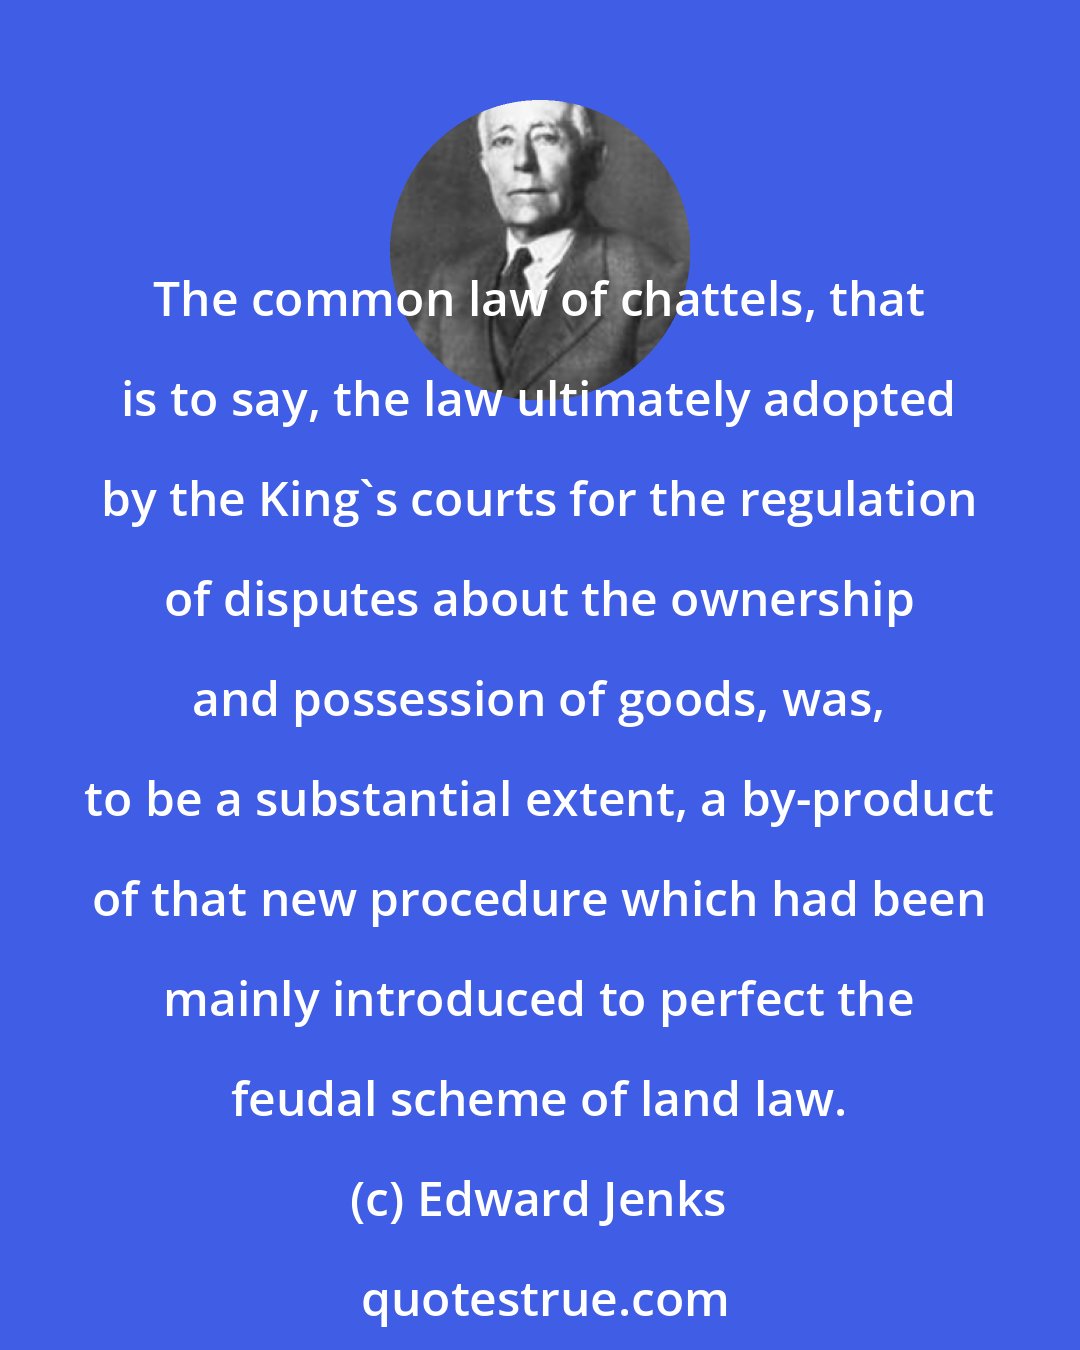 Edward Jenks: The common law of chattels, that is to say, the law ultimately adopted by the King's courts for the regulation of disputes about the ownership and possession of goods, was, to be a substantial extent, a by-product of that new procedure which had been mainly introduced to perfect the feudal scheme of land law.